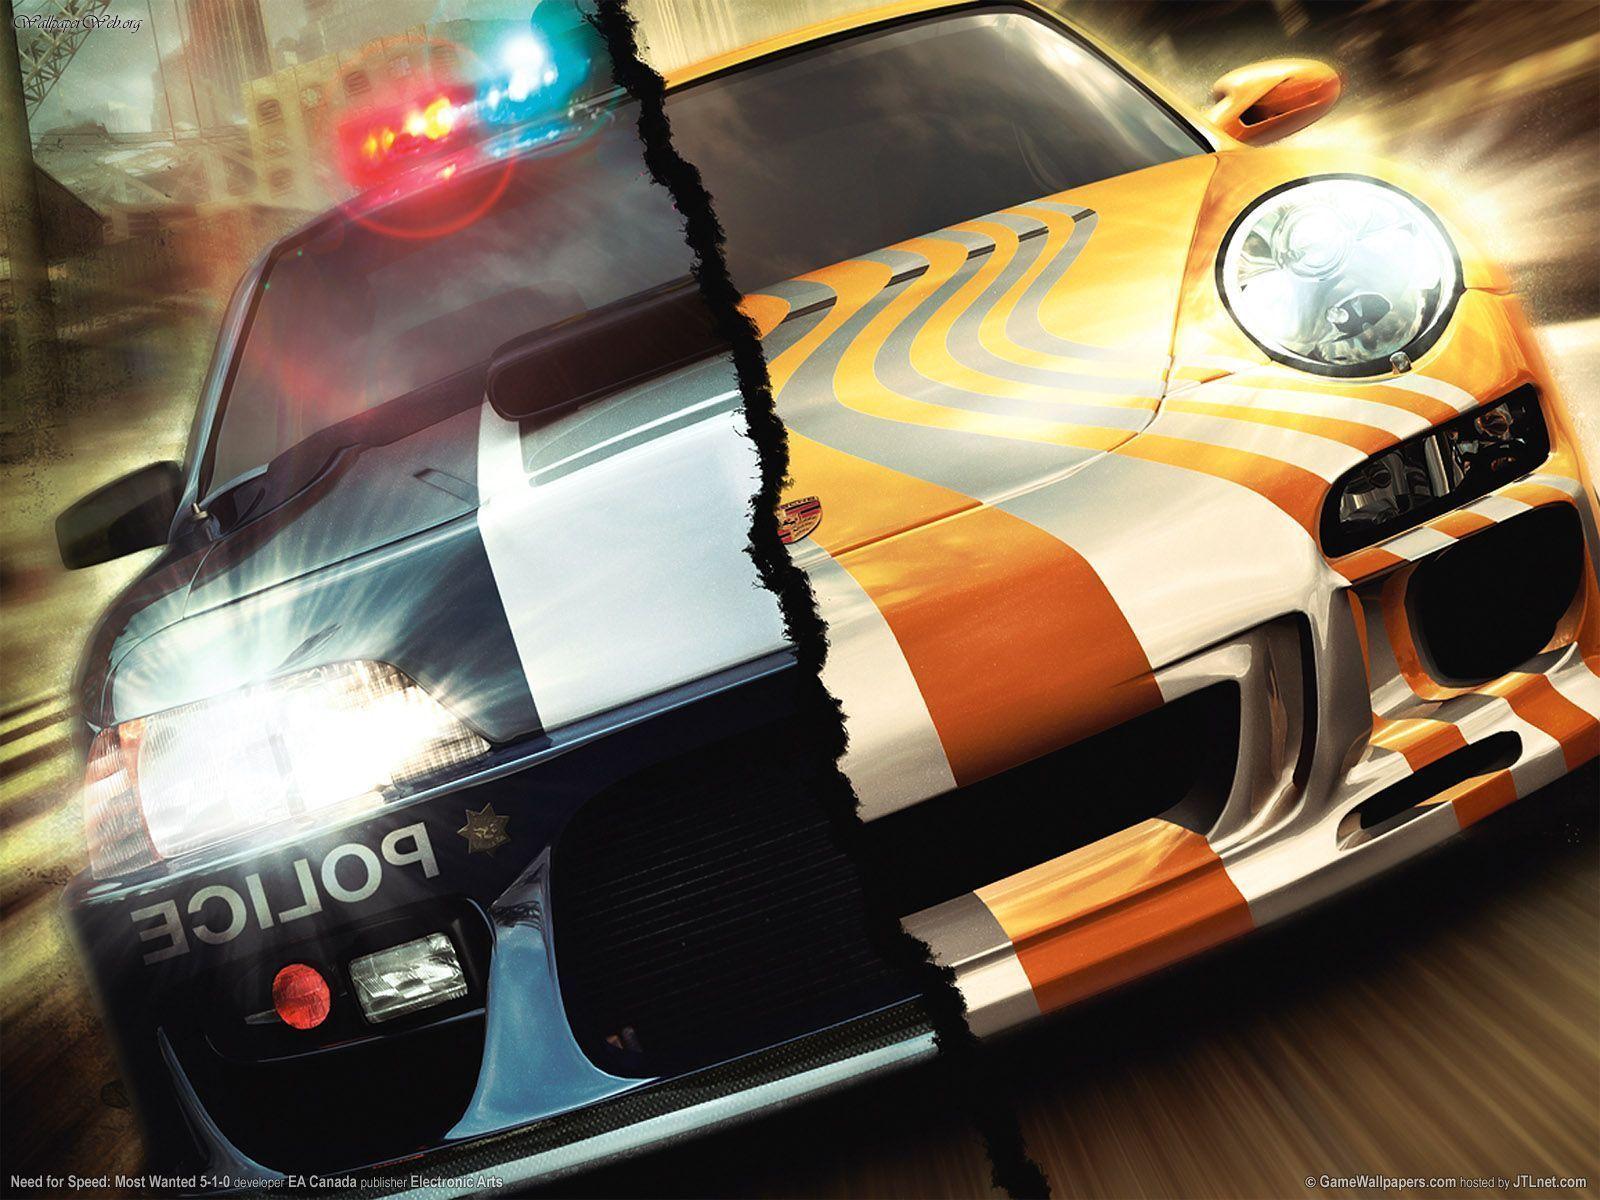 Need For Speed: Most Wanted Wallpaper. Need For Speed: Most